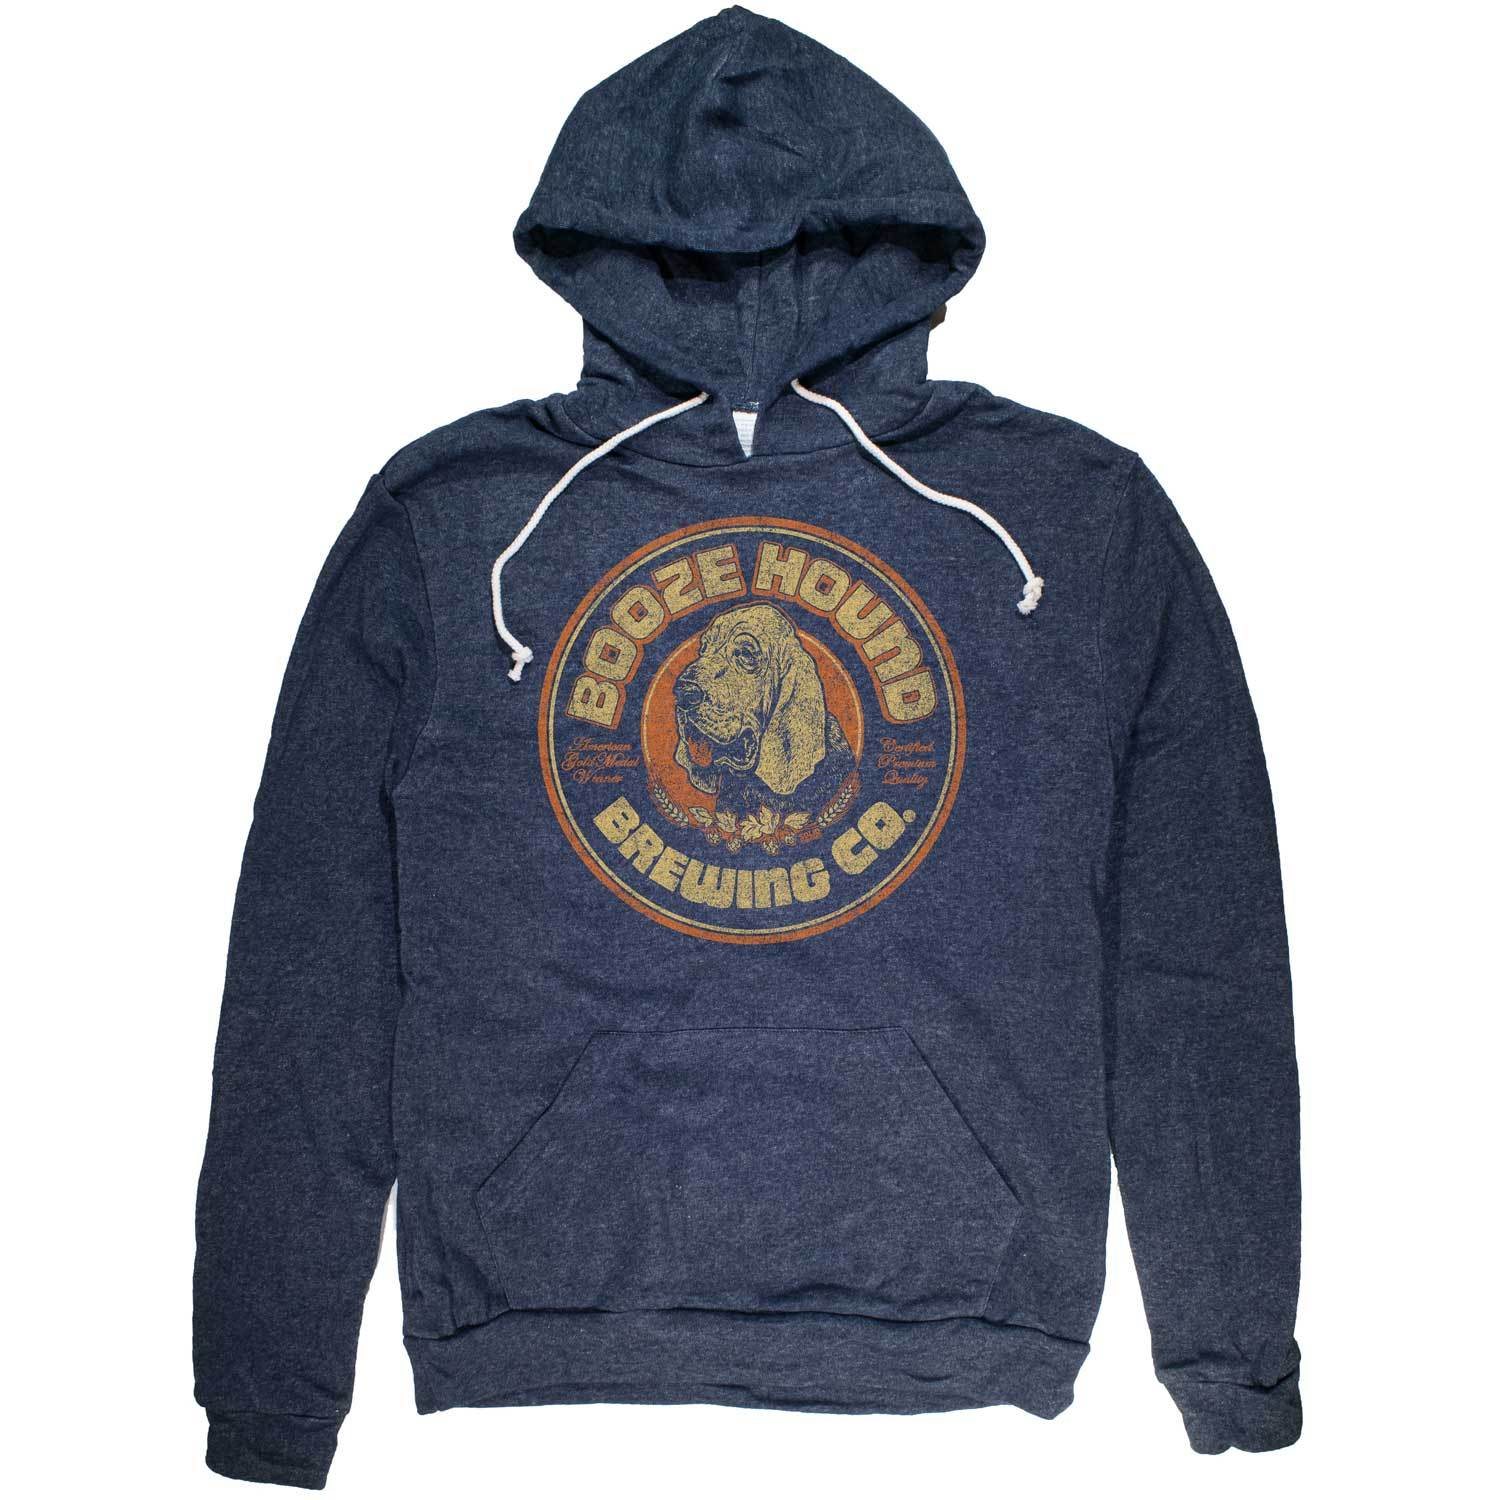 Boozehound Vintage Inspired Pullover Hoodie with funny dog brewery graphic | Solid Threads